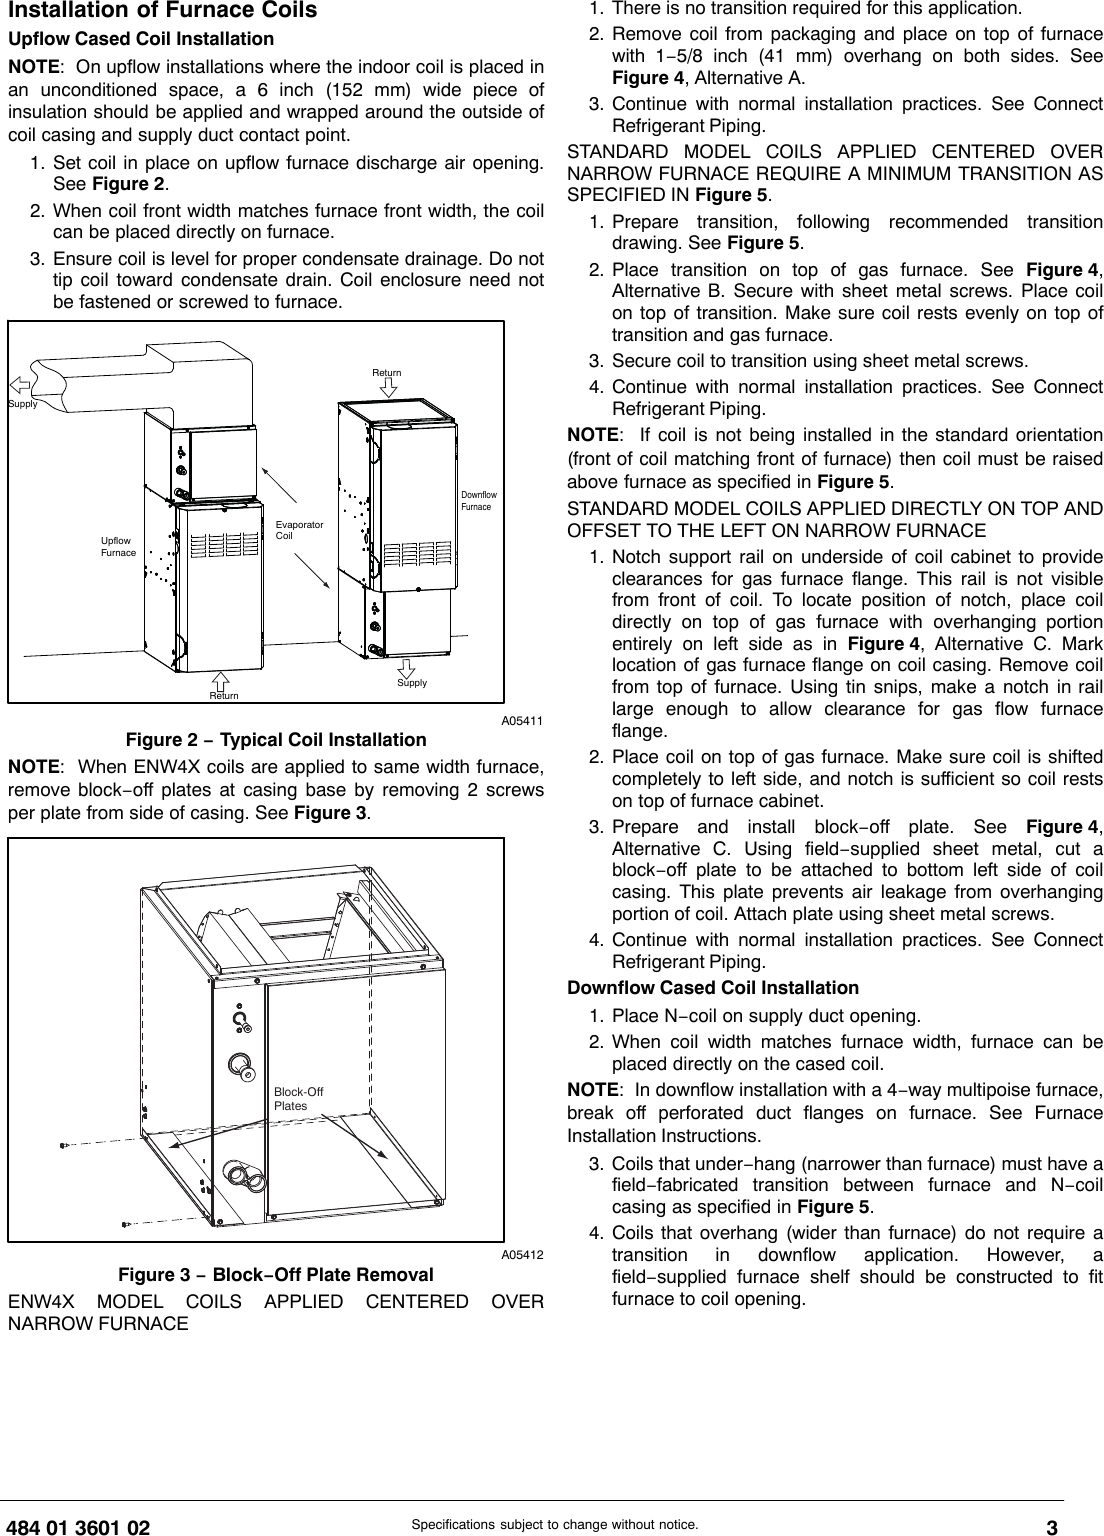 Page 3 of 6 - ICP END4X36L17A1 48401360102 User Manual  EVAPORATOR COILS - Manuals And Guides 1709106L